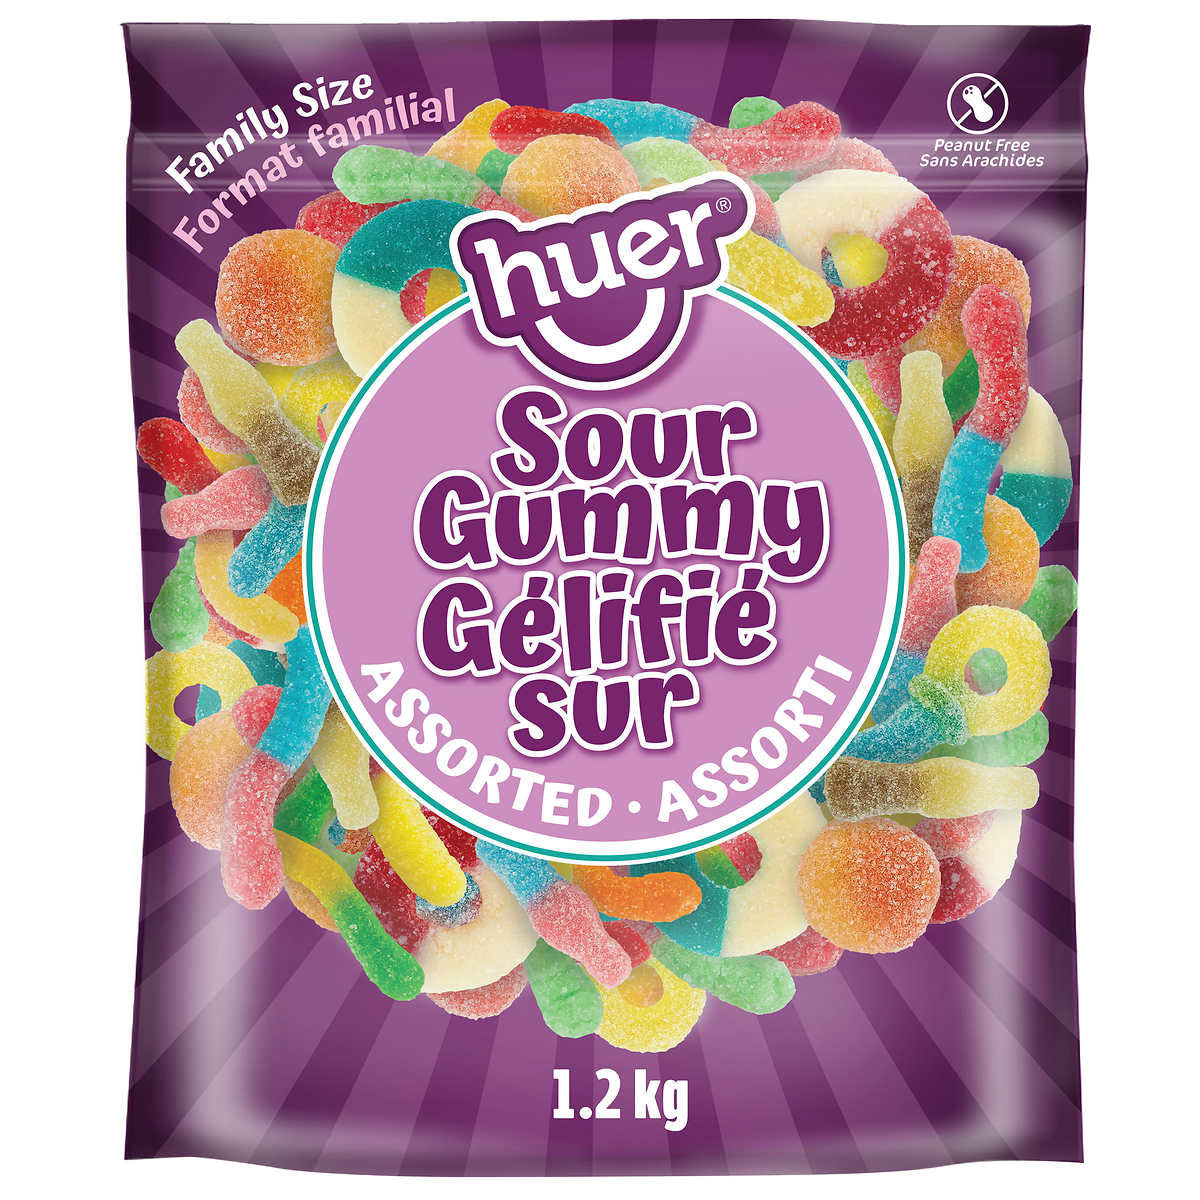 Huer Assorted Sour Gummy Candy, Family Size, 1.2kg/2.6 LB., Bag, {Imported from Canada}